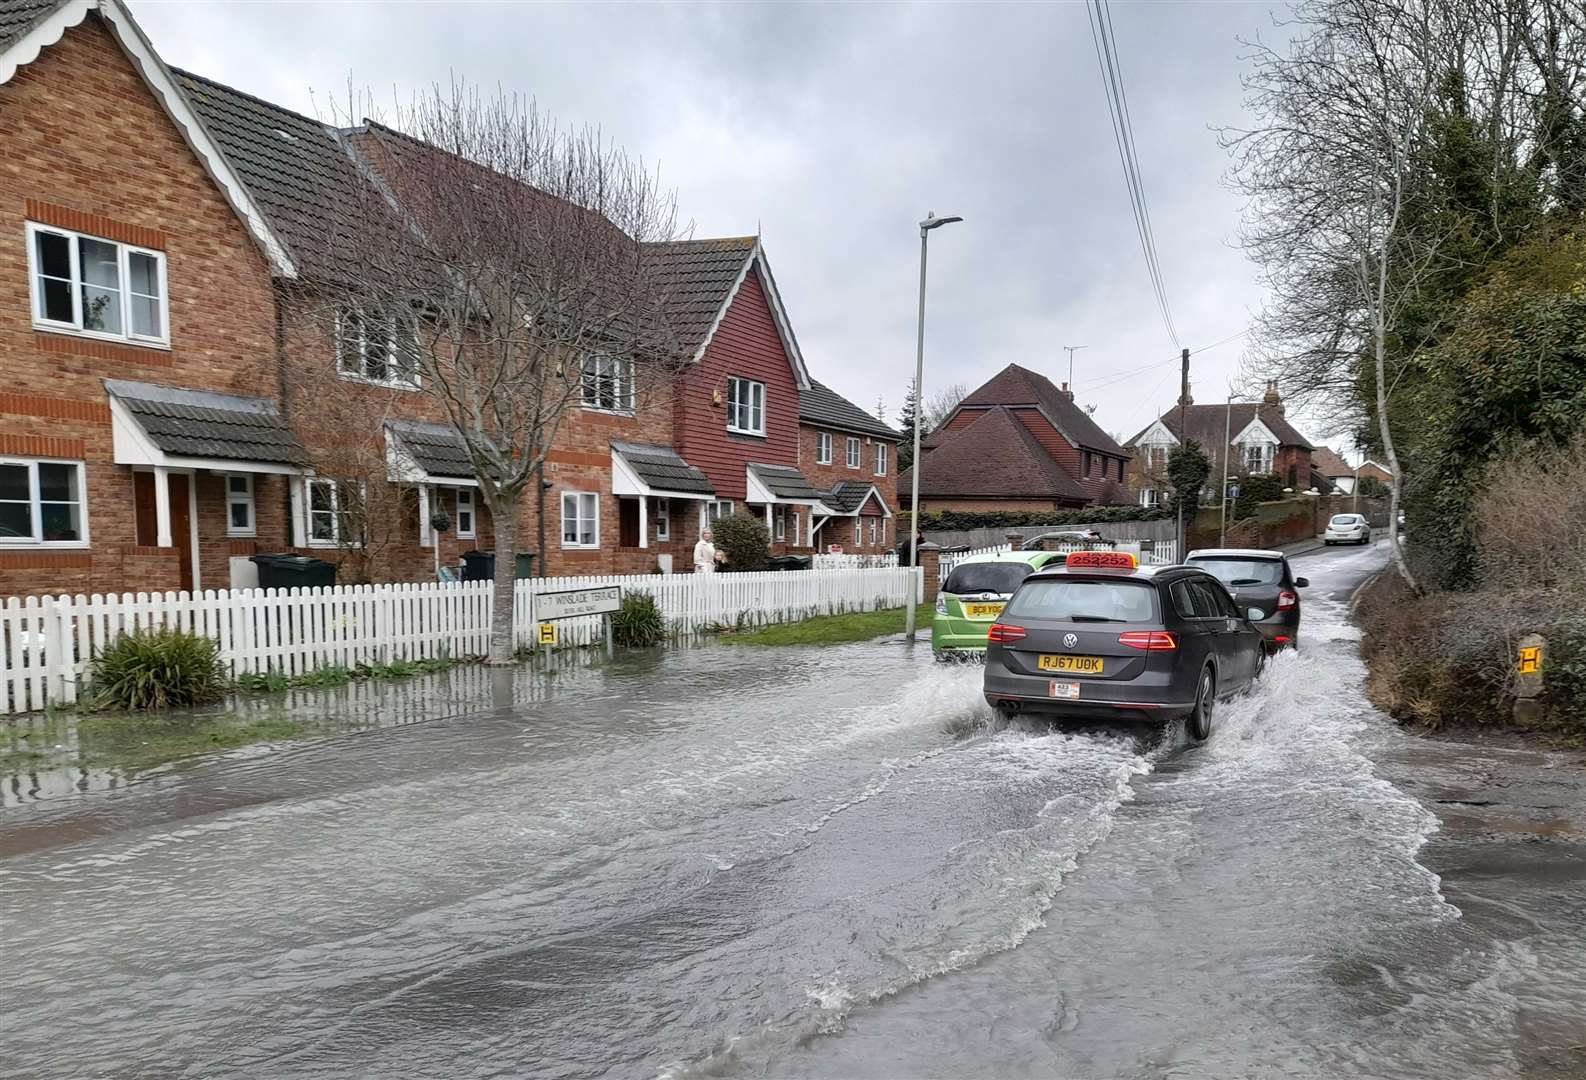 John Bailey says the water is "endangering" houses in the road. Picture: John Bailey